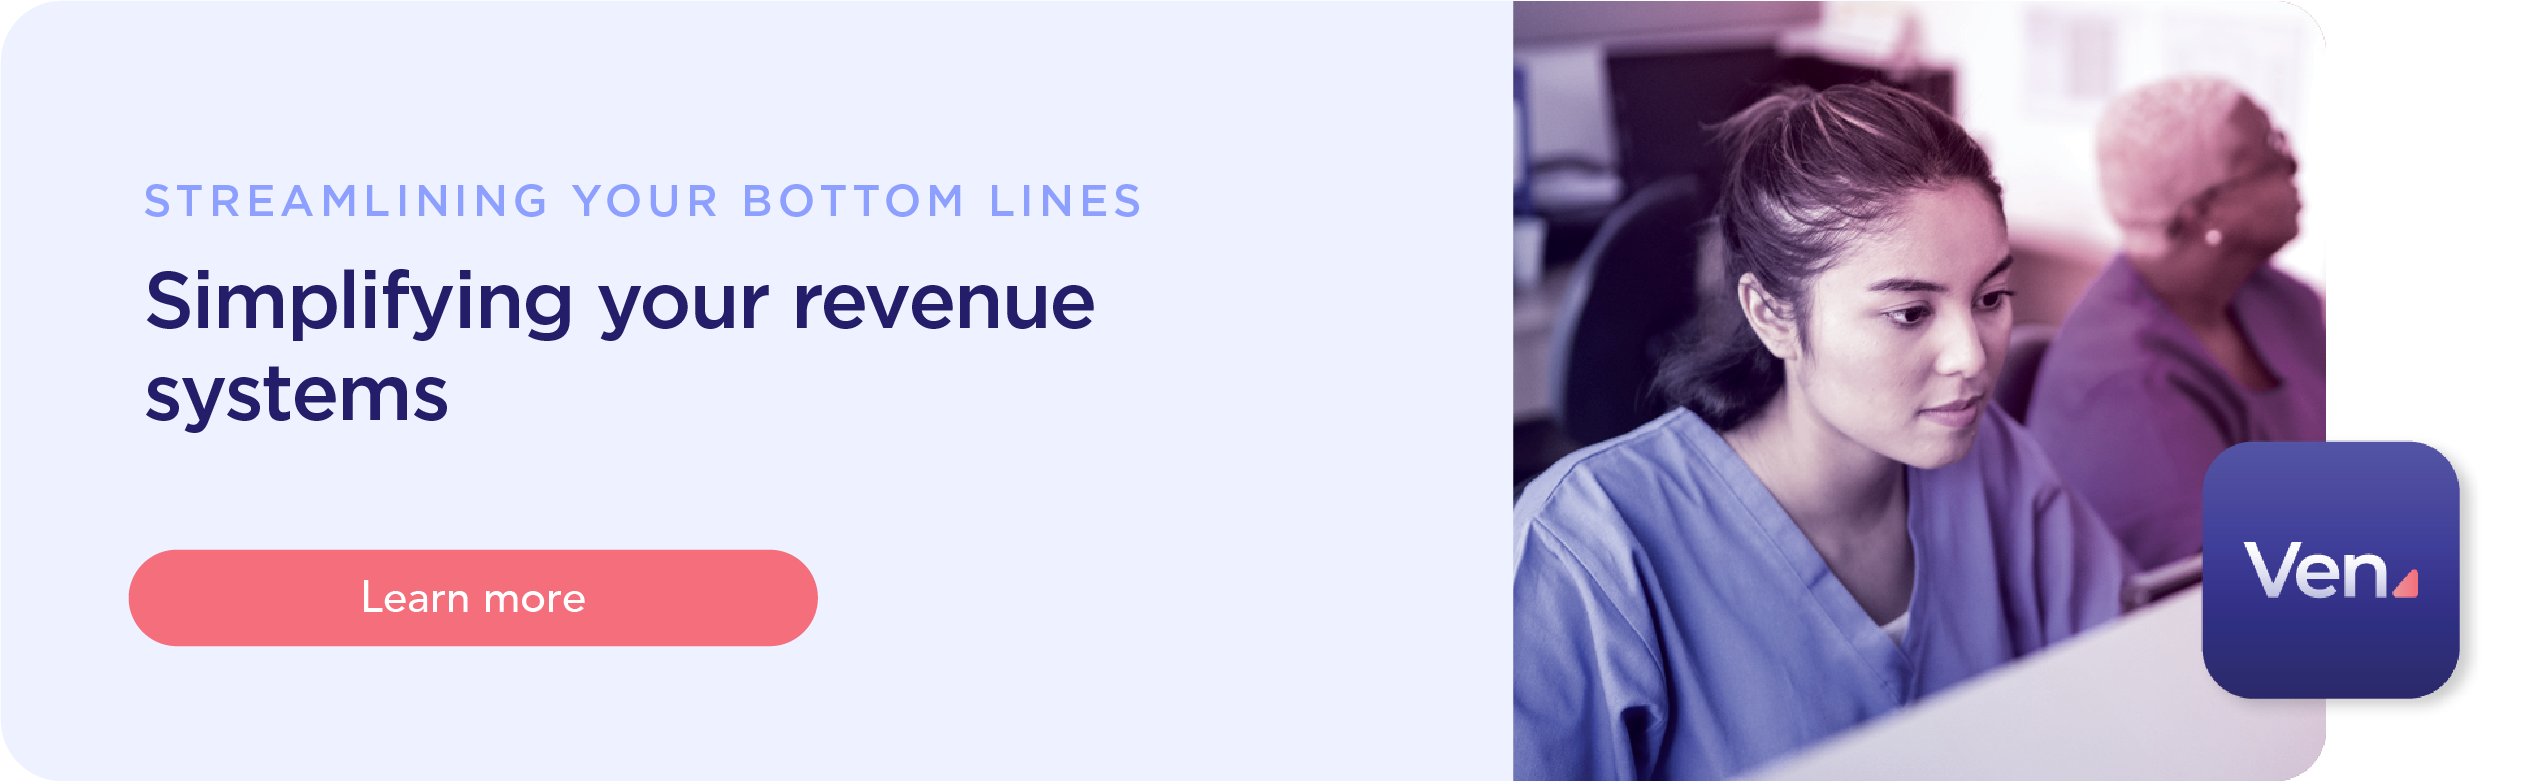 Simplifying your revenue systems. Learn more at our streamlining your bottom line landing page.